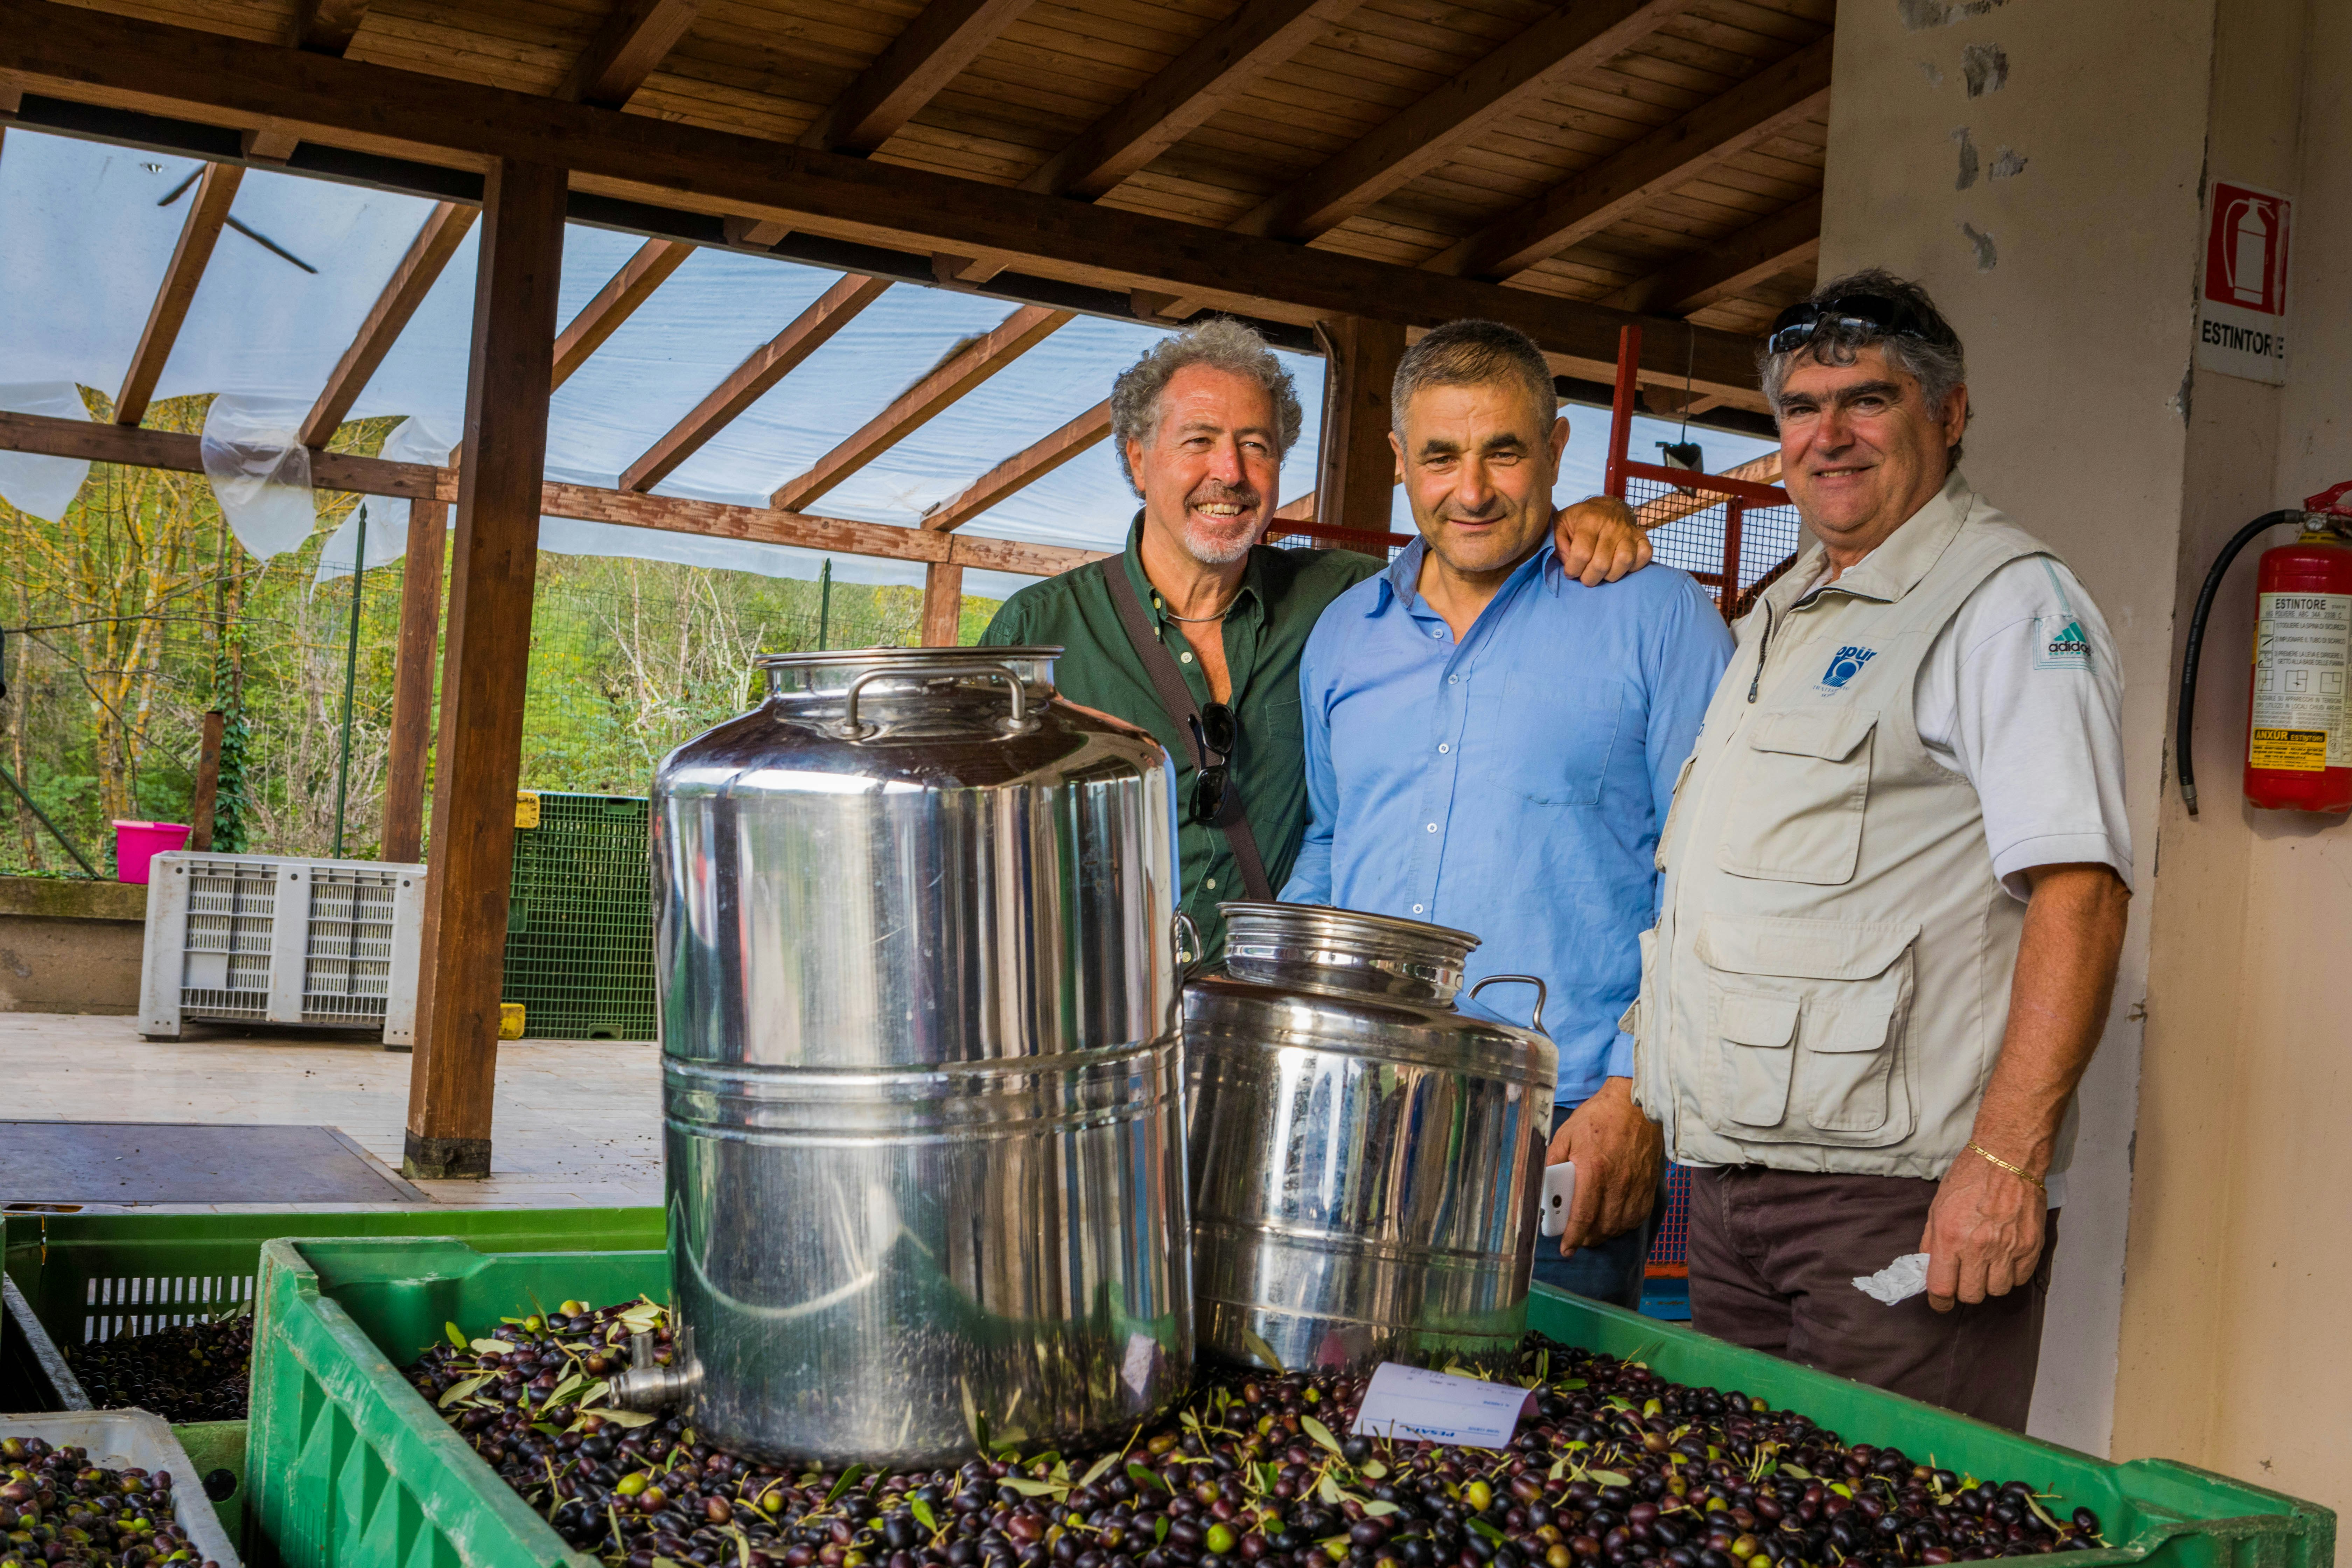 Spada, Guglietta, and Spirito stand together by a green bin of dark black and brown olives, some with the leaves still attached. Two silver stainless steel fusti, one large and one small, are perched on top of the mound of olives. 